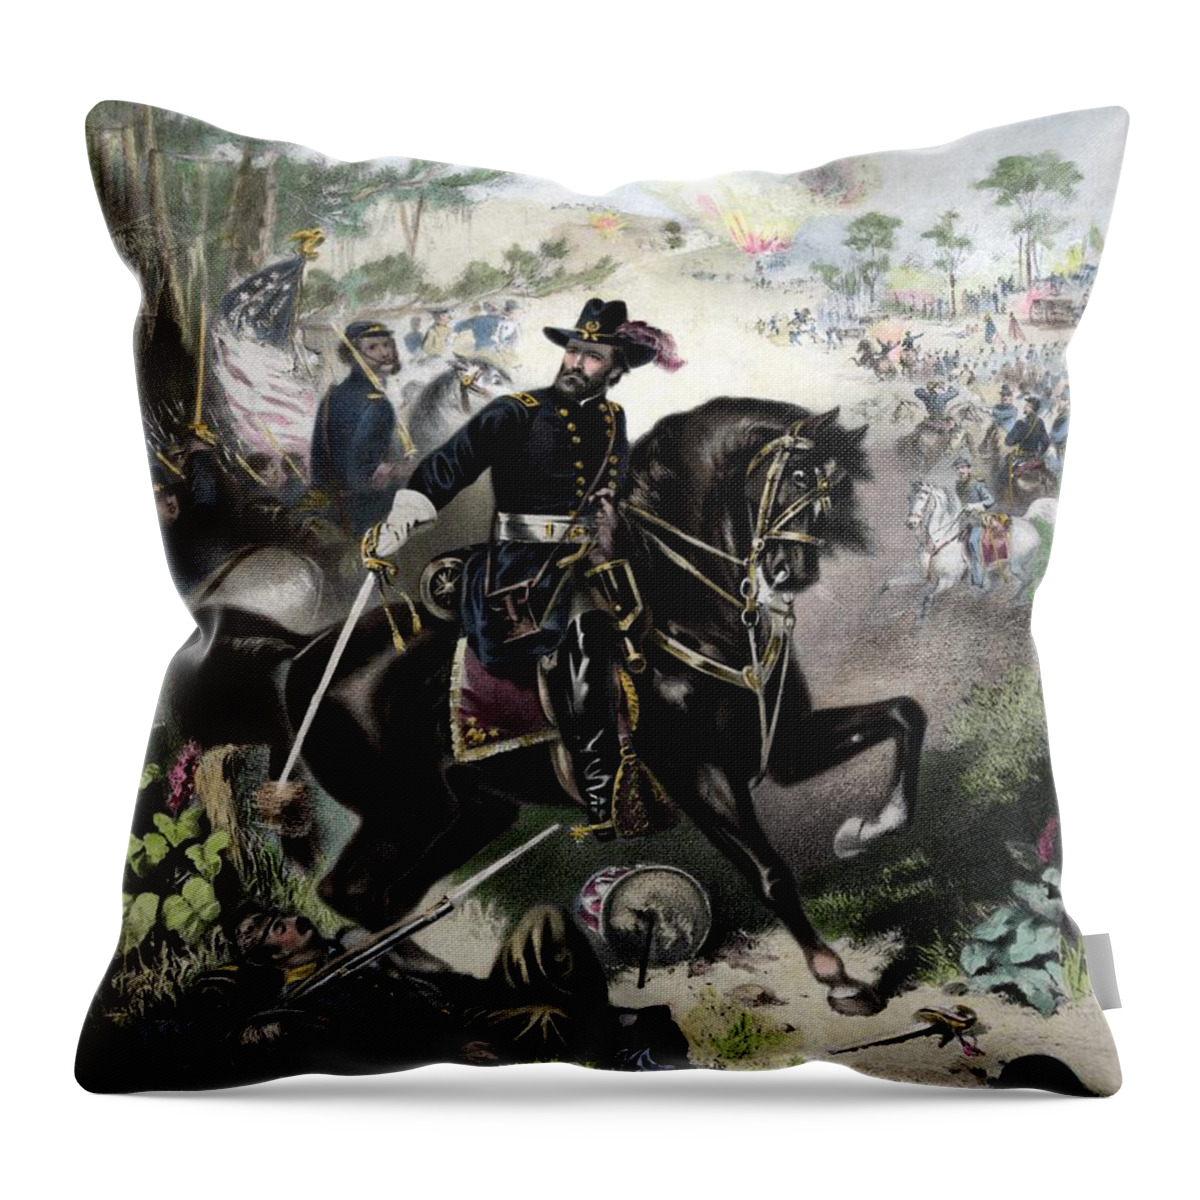 General Grant Throw Pillow featuring the painting General Grant During Battle by War Is Hell Store